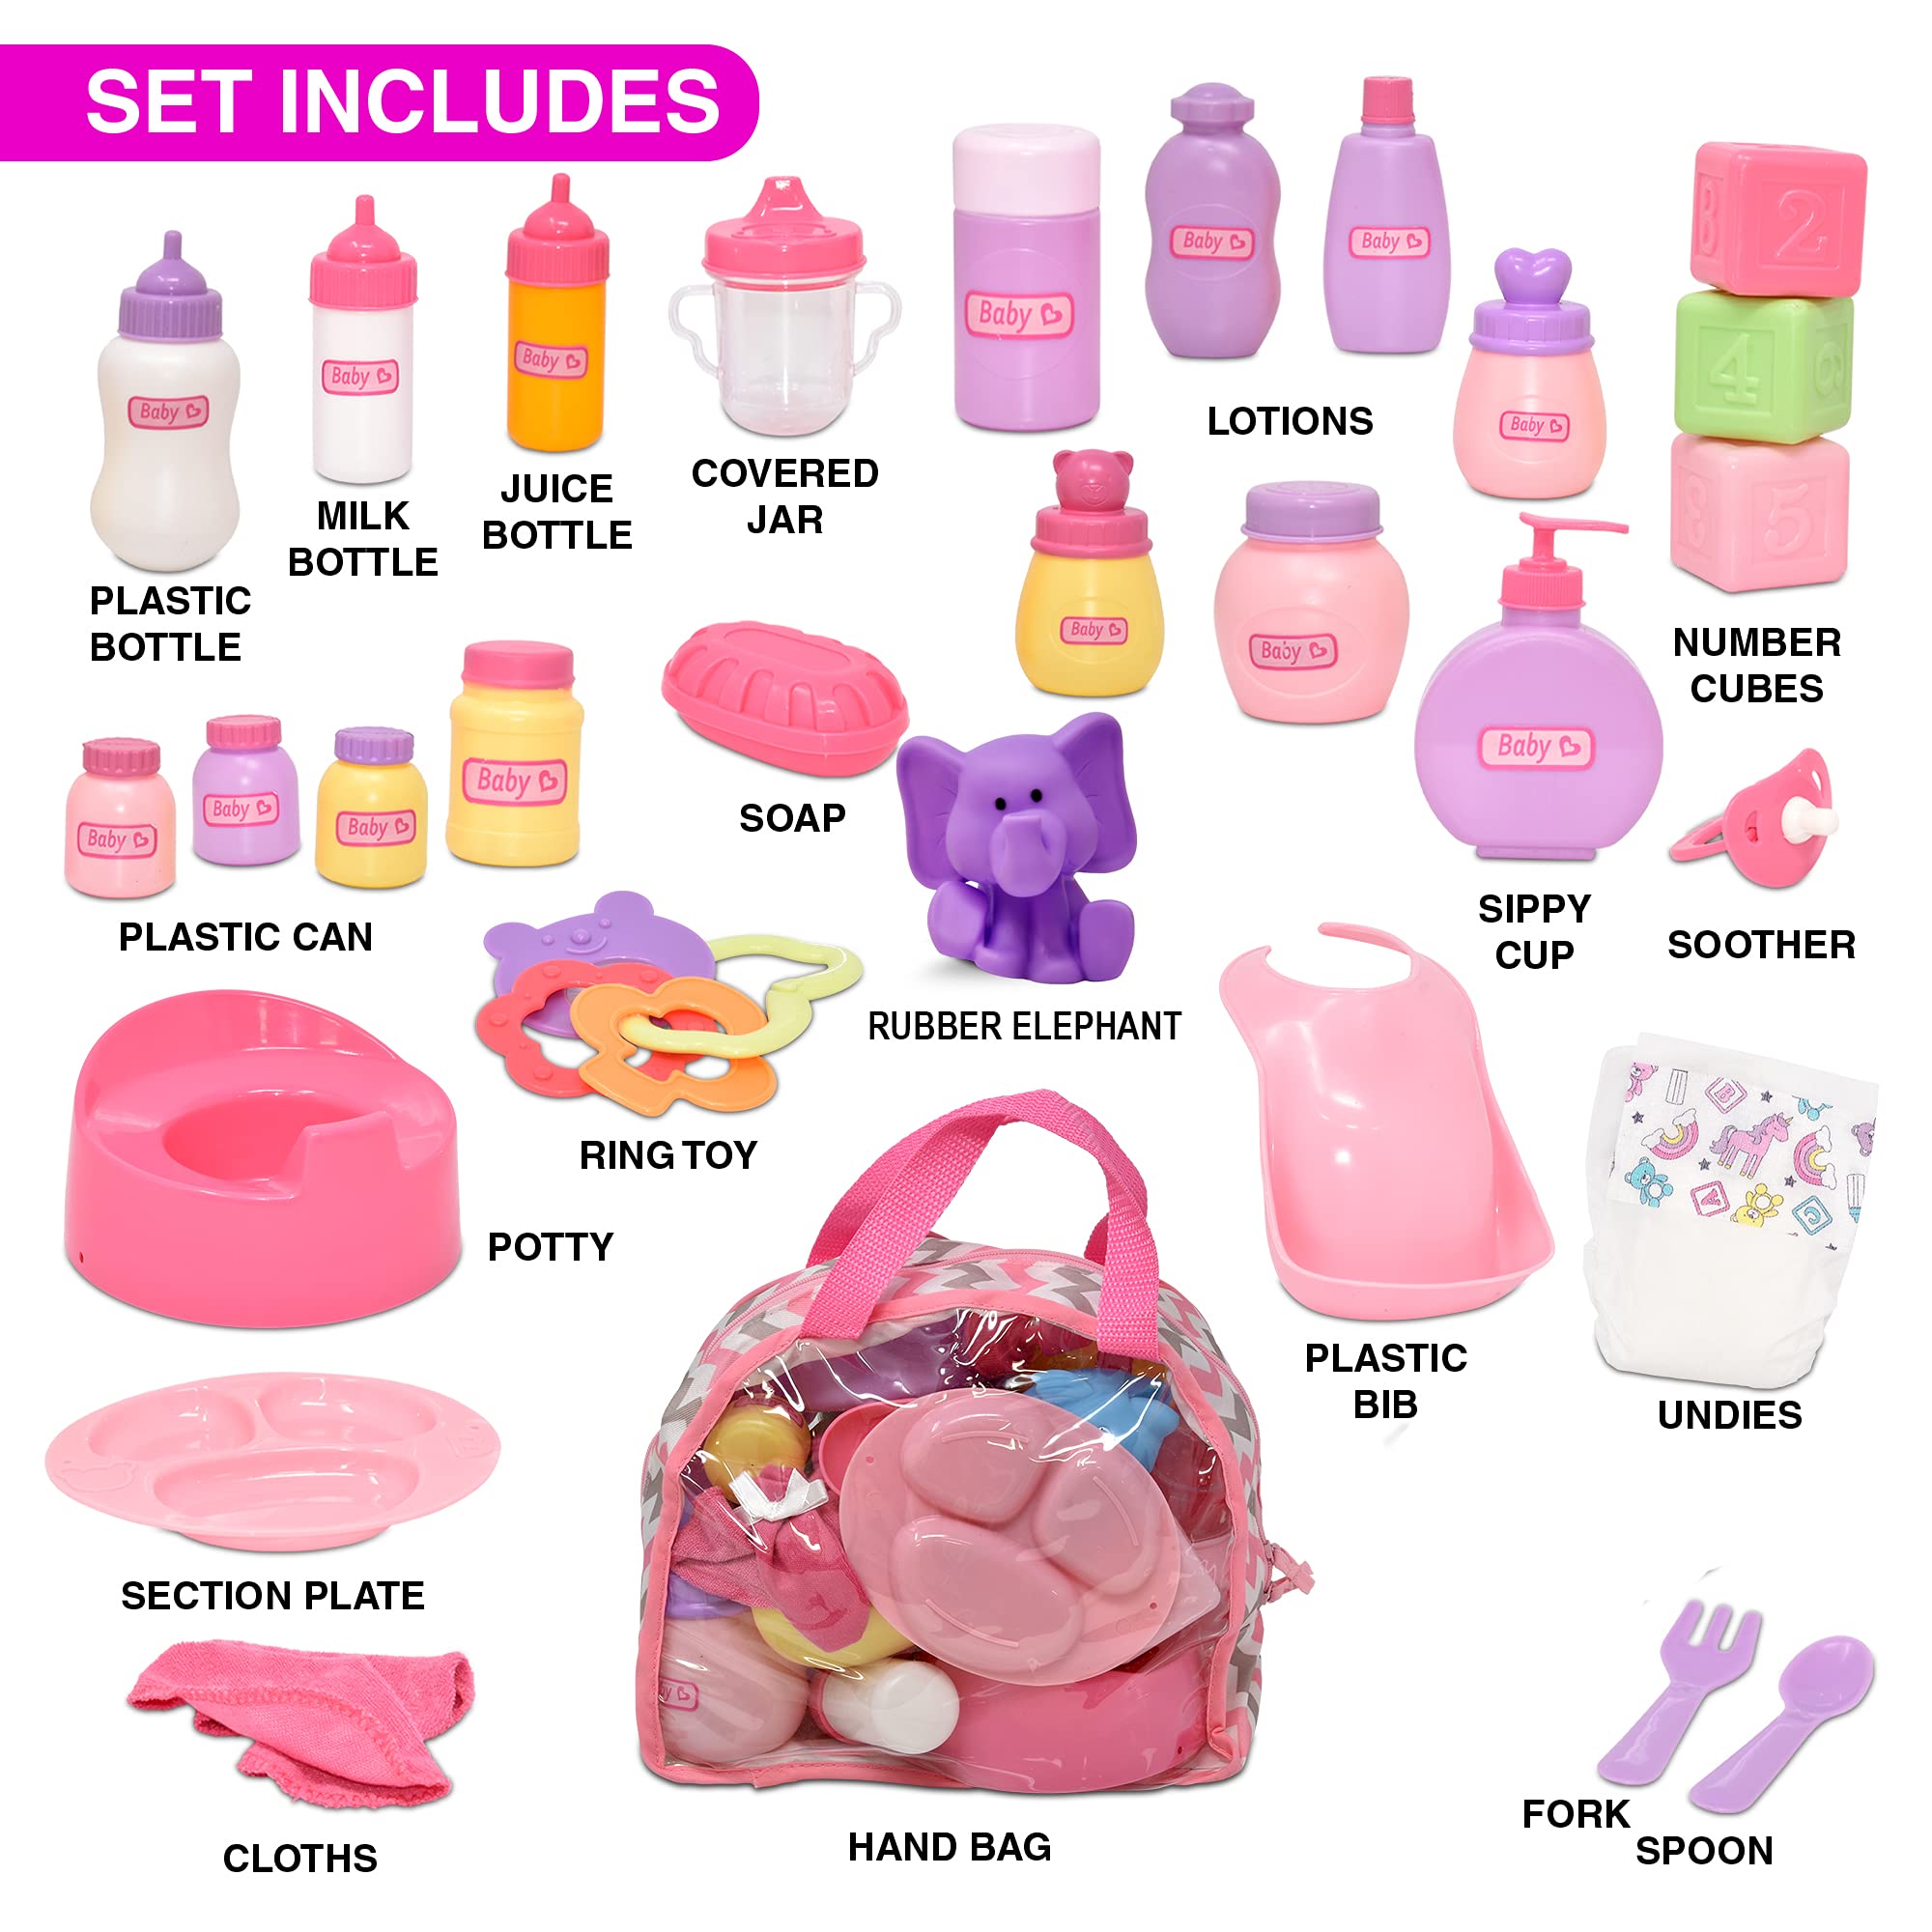 Baby Doll Accessories, Baby Doll Diaper Bag Set with Doll Toy Accessories Carry Along Case with Feeding and Caring Baby Accessories, Baby Bottles Diapers Bath Toys Pacifier for Dolls and More